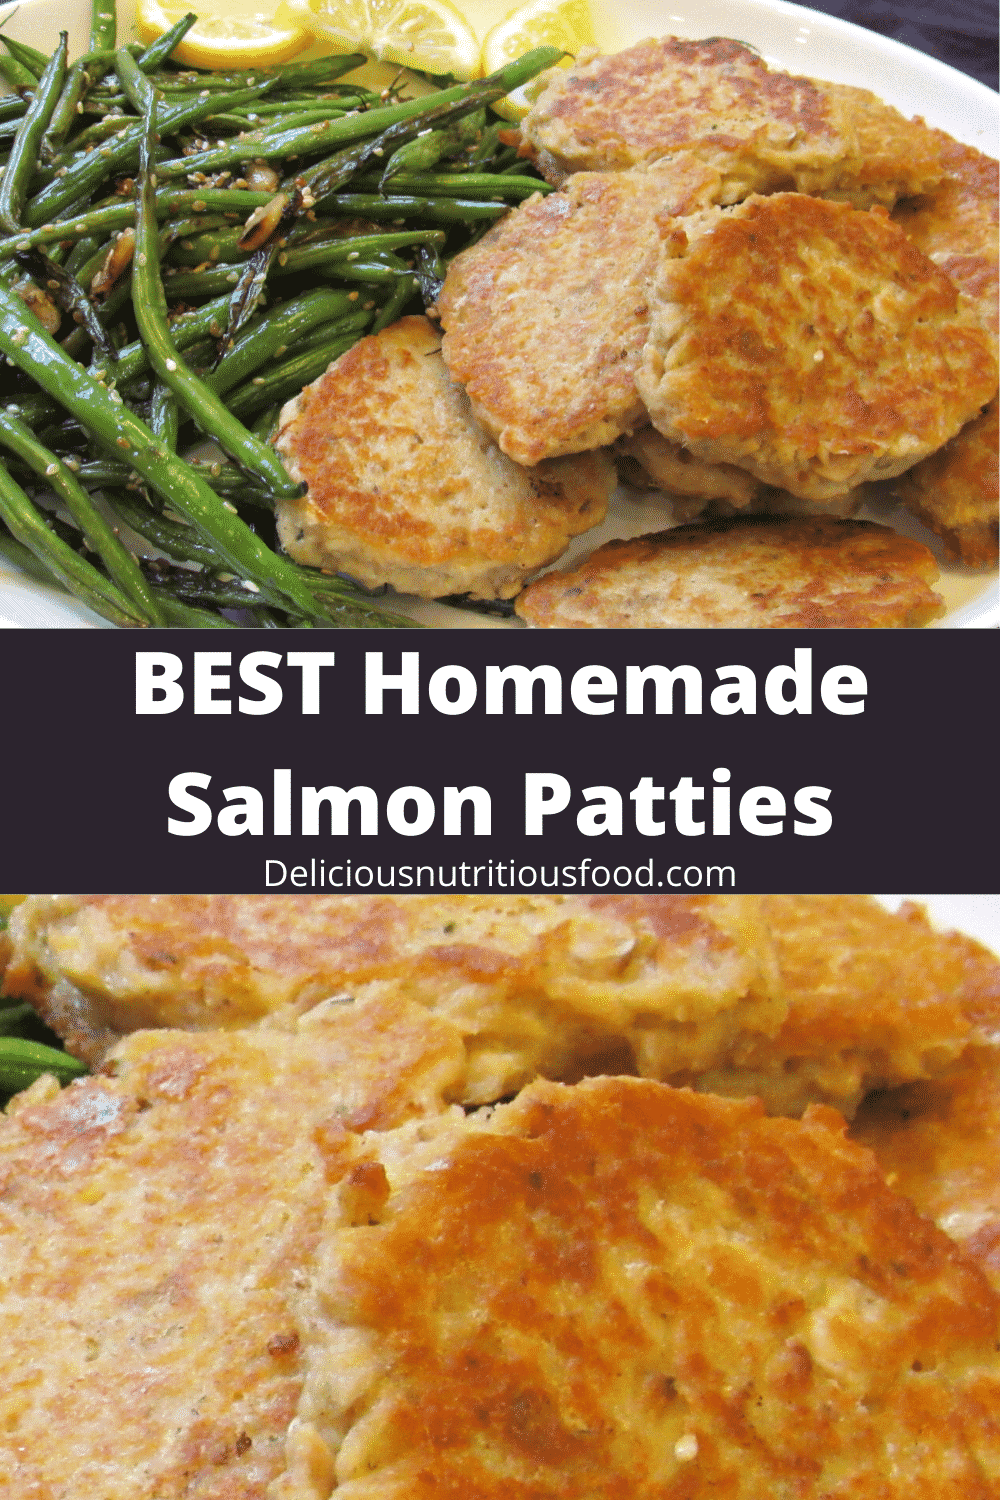 How to make crispy moist salmon patties easy way! #cannedsalmonpatties #friedsalmonpatties #salmonpattieswithcannedsalmon #healthysalmonpatties #salmonpattiesrecipewithcannedsalmon #pinksalmonpattiesseafoodrecipes #fish #seafoodrecipes #healthyrecipesseafood #seafoodeasy #seafoodmeals #seafoodhealthy #seafoodideas #salmonpatties #salmonpattiesrecipe #salmonpattyrecipe #howtomakesalmonpatties #recipeforsalmonpatties #easysalmonpatties #crispysalmonbites #howtocooksalmonpatties #friedsalmonpatties #easyrecipeforsalmonpatties#seafoodbakedrecipes #recipesforsalmonbaked #fishdinner #recipesIlove #5ingredientsrecipes #deliciousnutritiousfoods #Maindishes #maindishrecipe #mainrecipes #deliciousmaindishes #maindishesfordinner #mainmealideas #healthymaindishes #dinnermain #mainentrees #maindishesforcrowd #maindishesforpotluck #maindishesfordinnereasy #castironskillet #castironcooking #castironrecipeseasy #cookingincastiron #castironrecipedinner #sourdoughrecipes #sourdoughstarter #sourdoughdiscardrecipes #sourdough #salmonpattiesrecipes #salmonpattieswithflour #easysalmonpatties #healthysalmonpatties #howmakesalmonpatties #easyrecipesforsalmonpatties #salmondishes #bakedsalmon #tastysalmon #Salmonlunch #salmondinner #recipessalmon #perfectsalmon